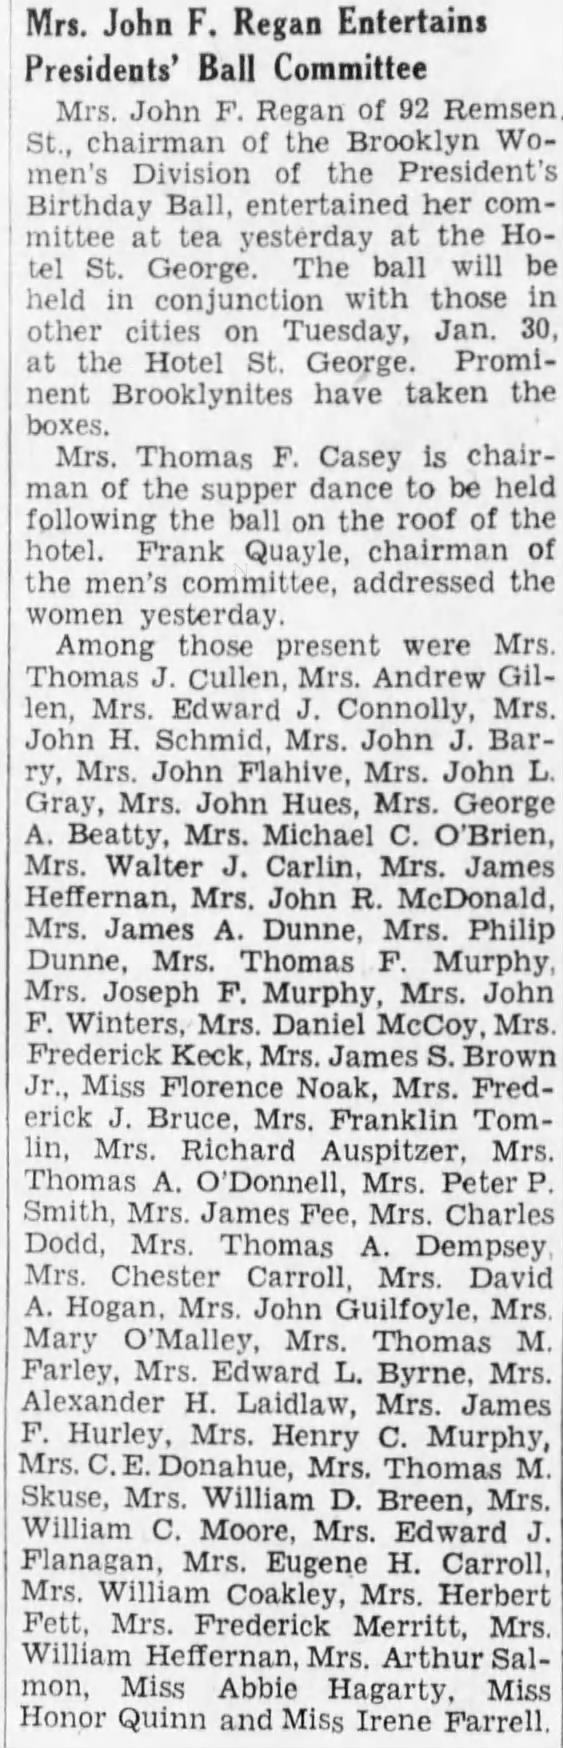 Party with lots of familiar names
Eagle Jan 19, 1934